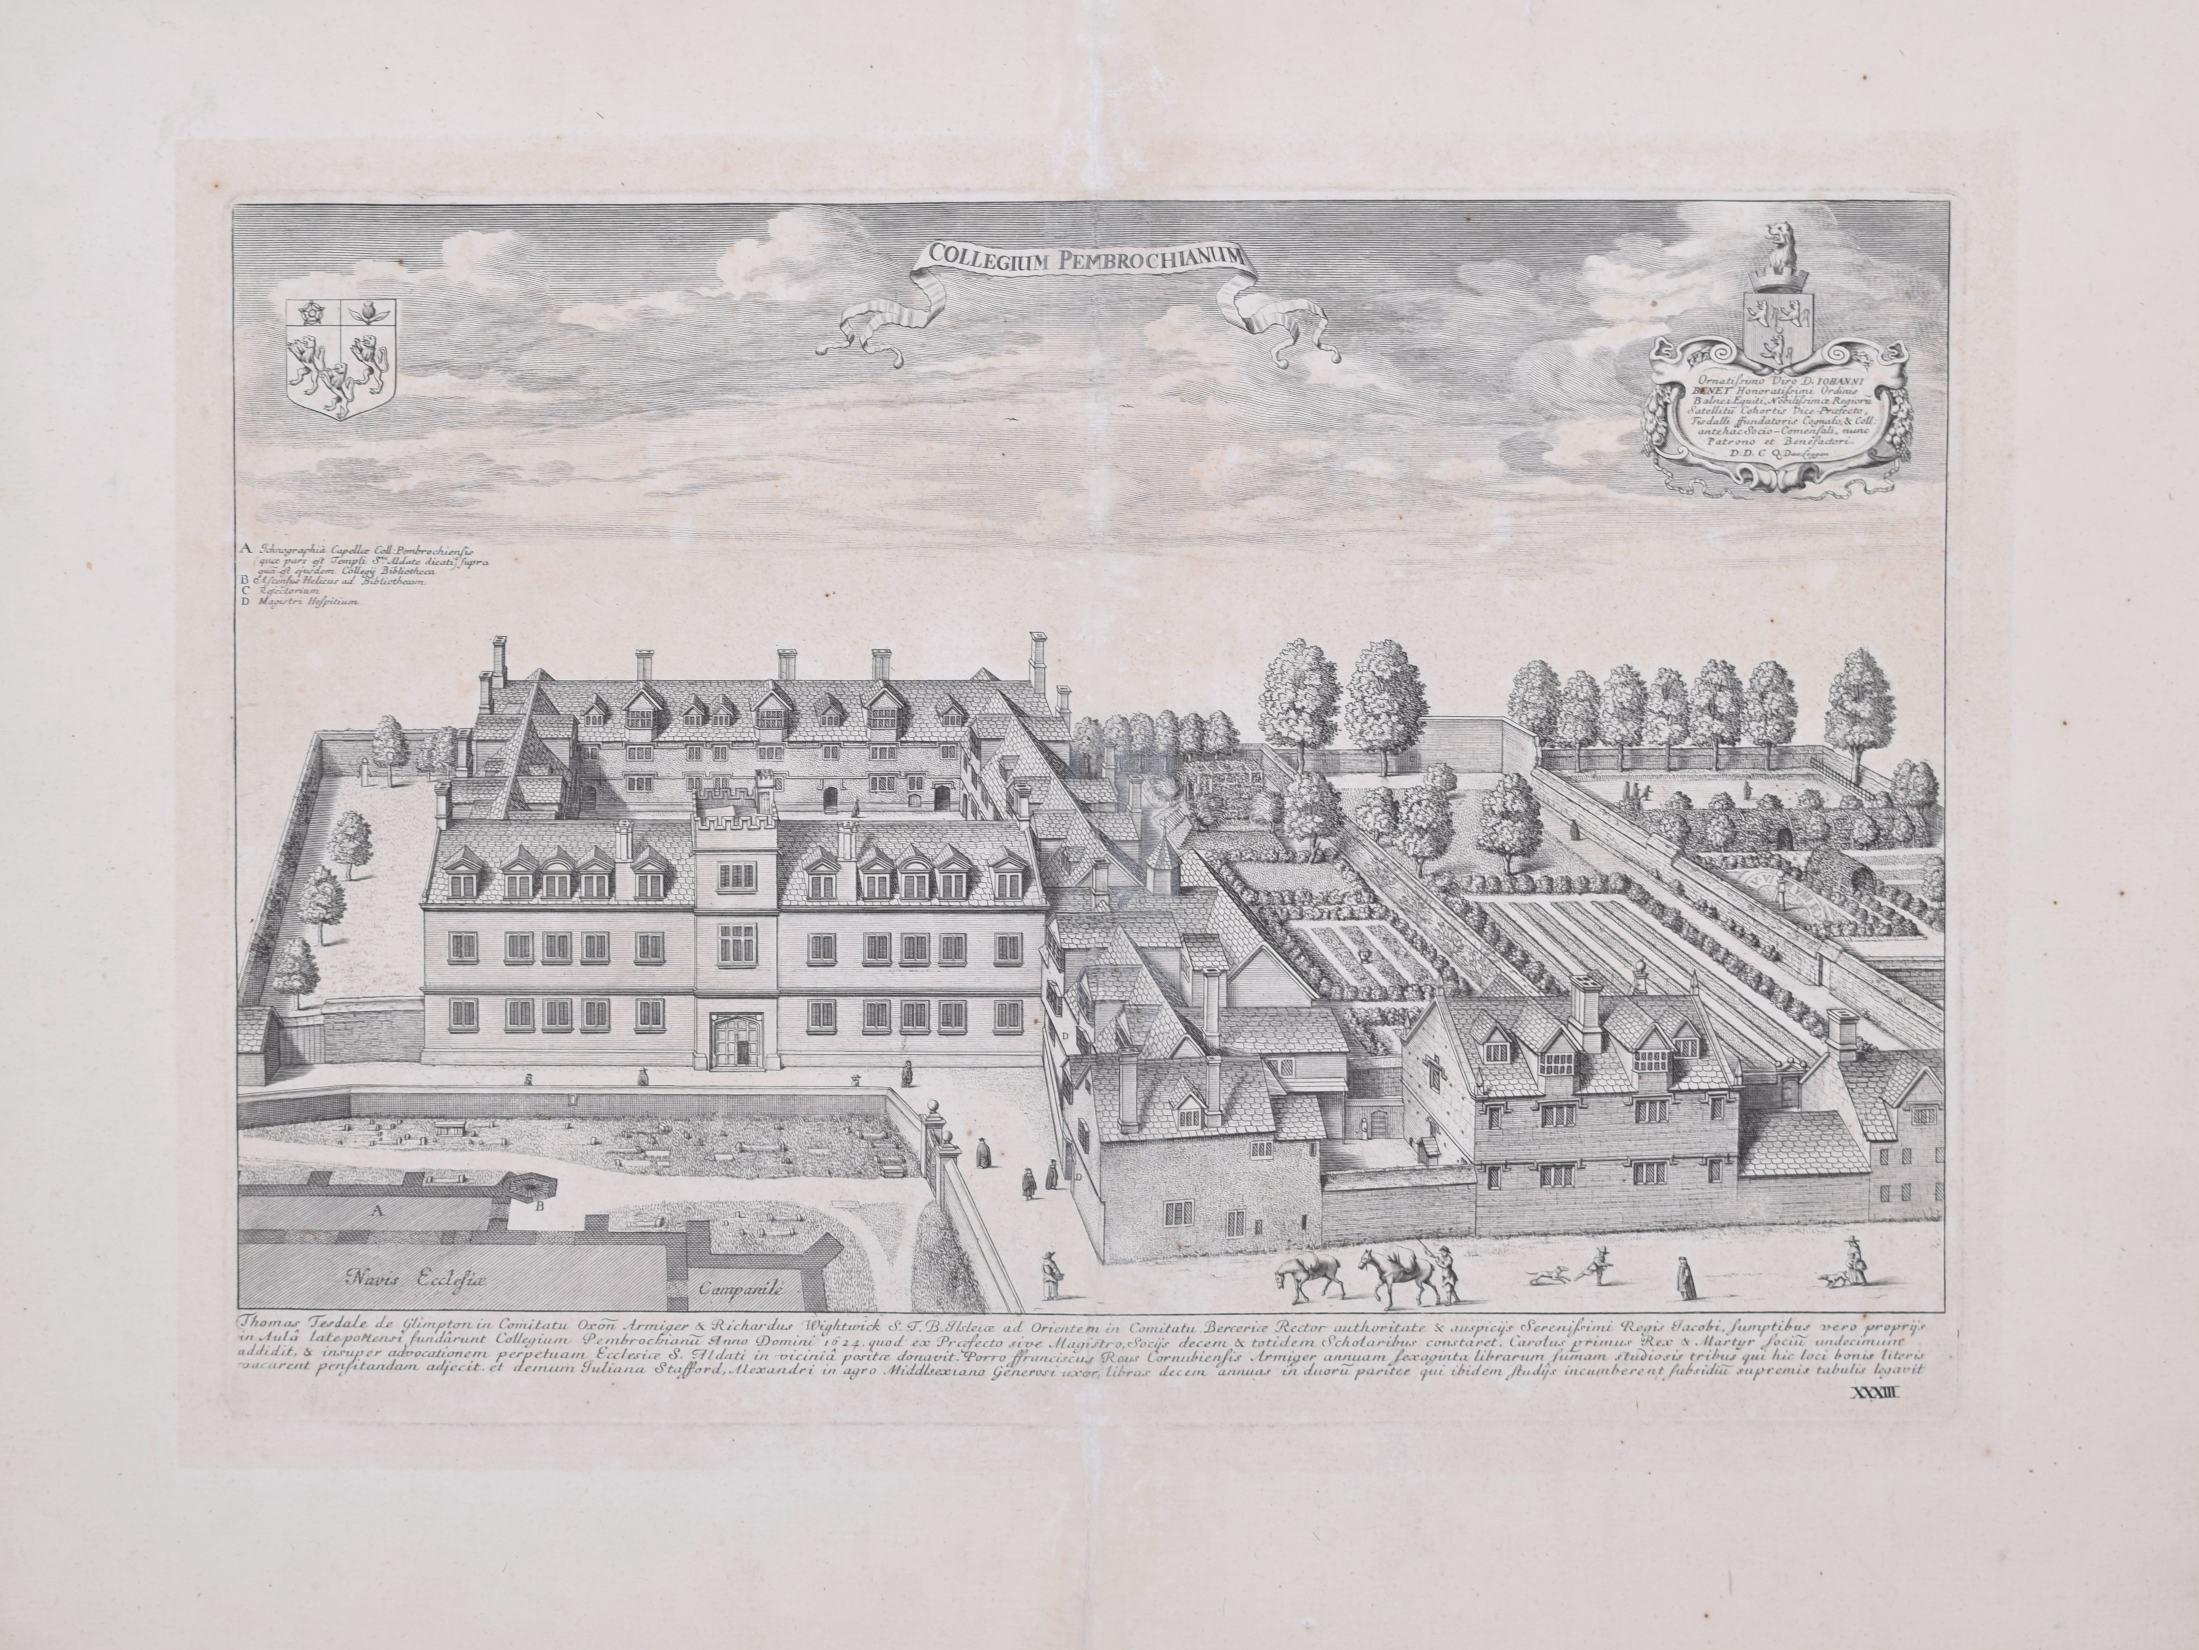 To see our other views of Oxford and Cambridge, scroll down to "More from this Seller" and below it click on "See all from this seller" - or send us a message if you cannot find the view you want.

David Loggan (1634 - 1692)
Pembroke College, Oxford